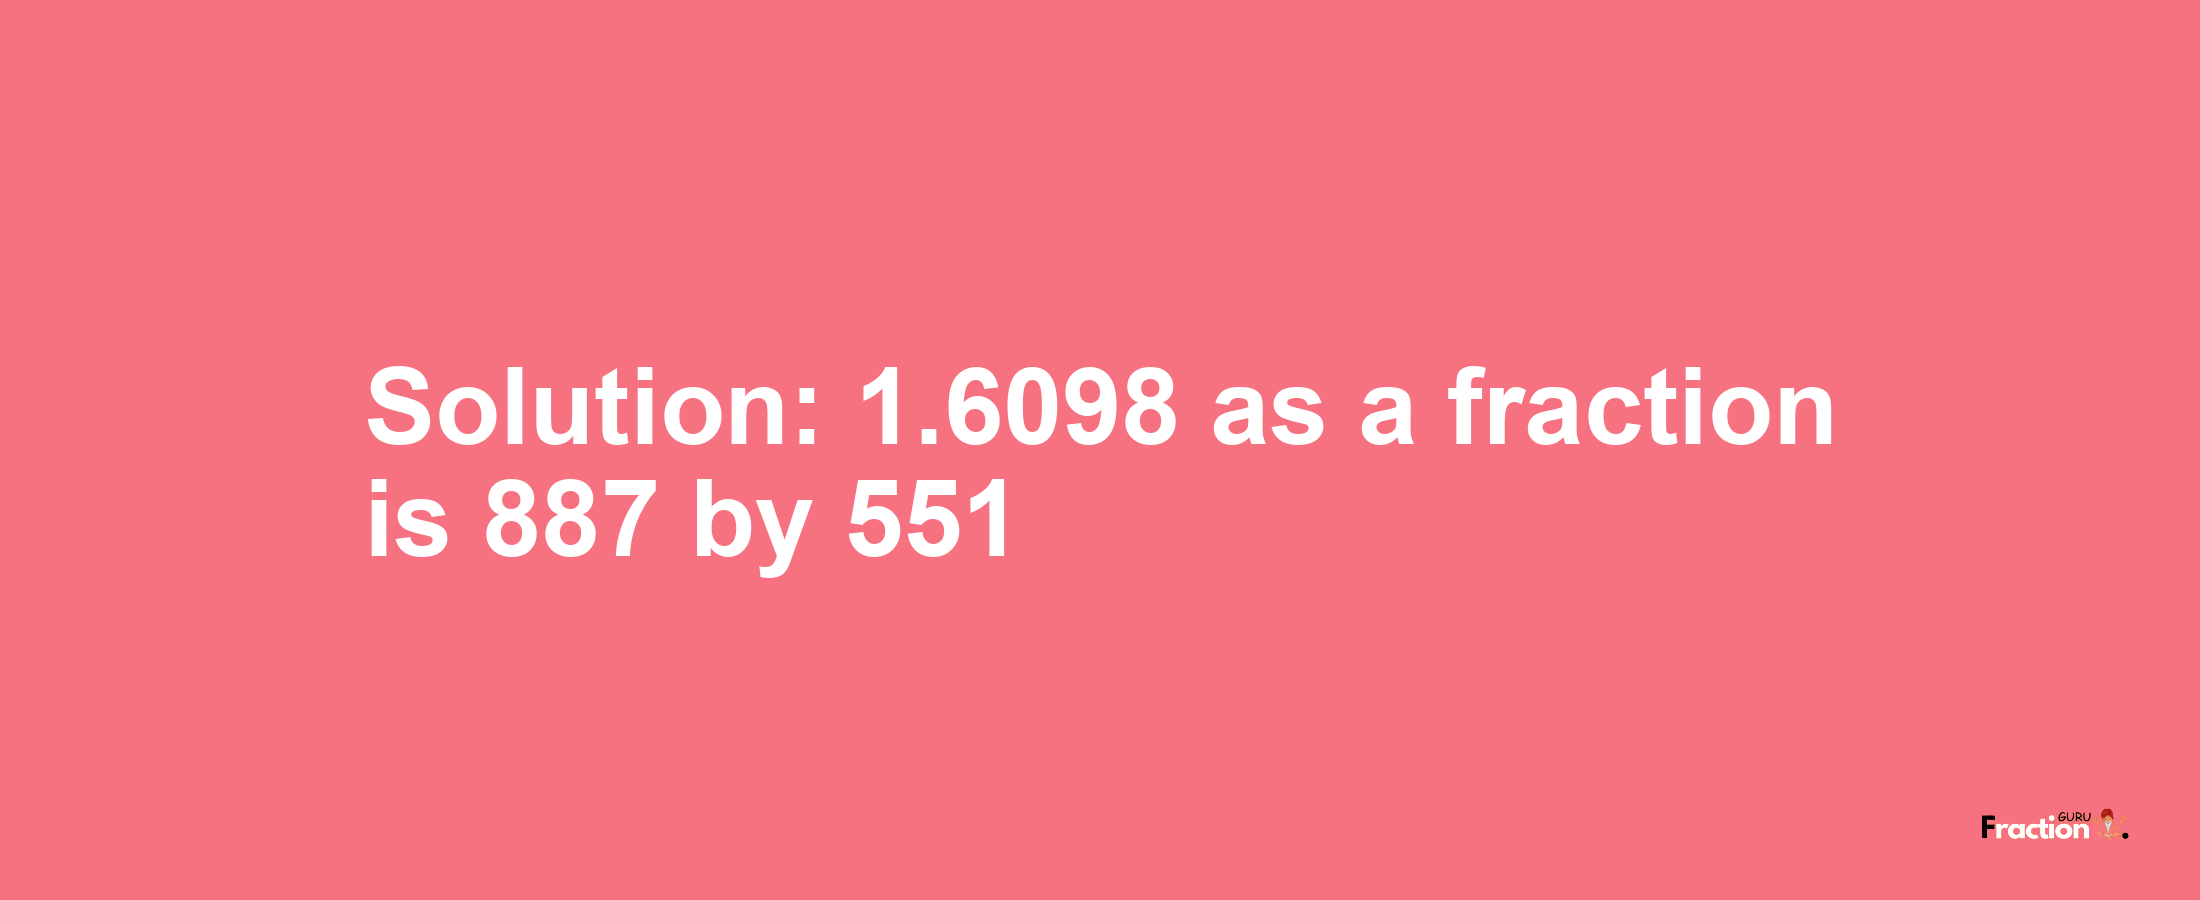 Solution:1.6098 as a fraction is 887/551